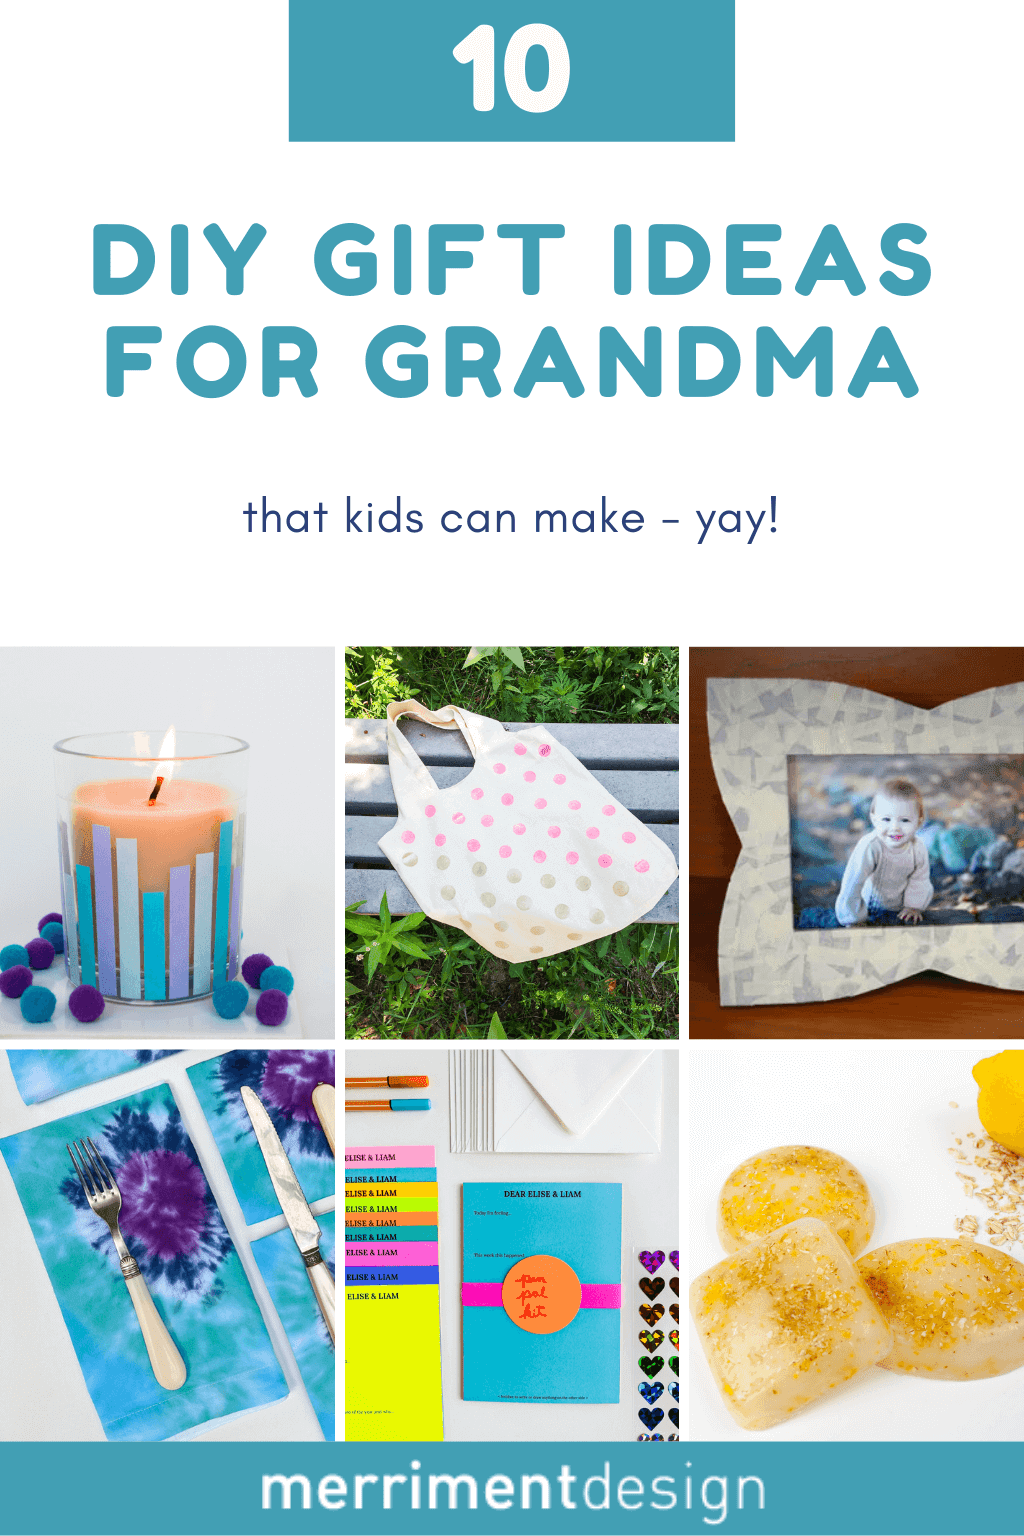 DIY Gift Ideas: 29 Handmade Gifts | Home Stories A to Z